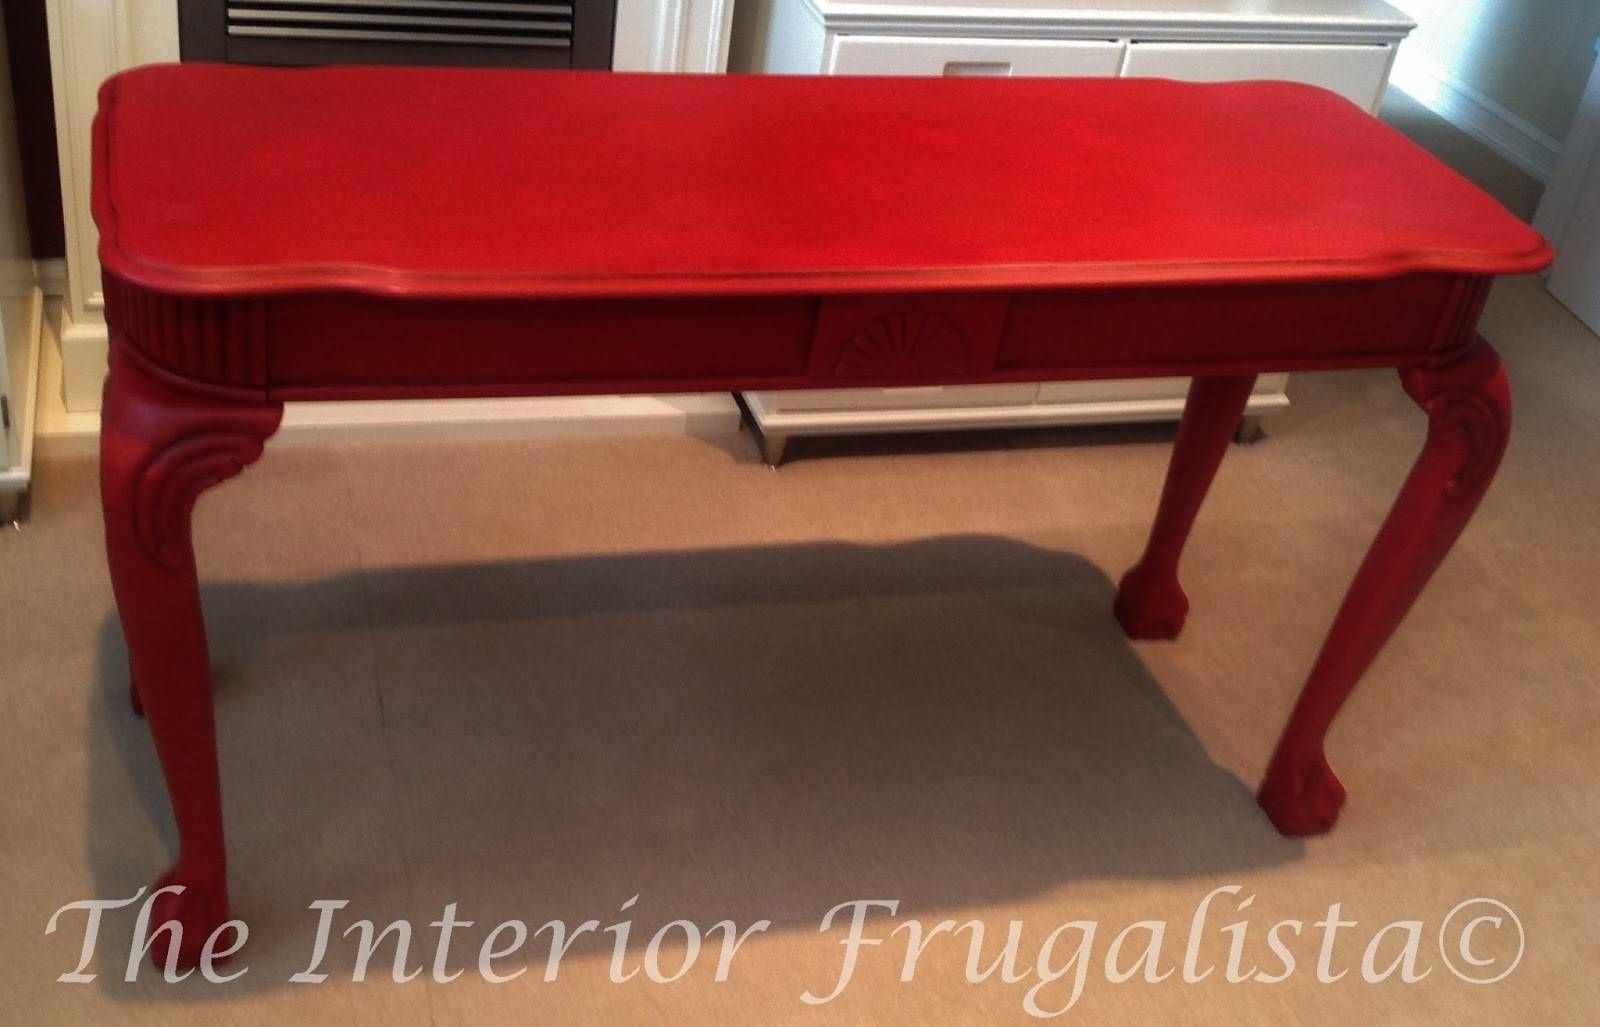 She's A Beauty! | The Interior Frugalista: She's A Beauty! Pertaining To Red Sofa Tables (Photo 5 of 15)